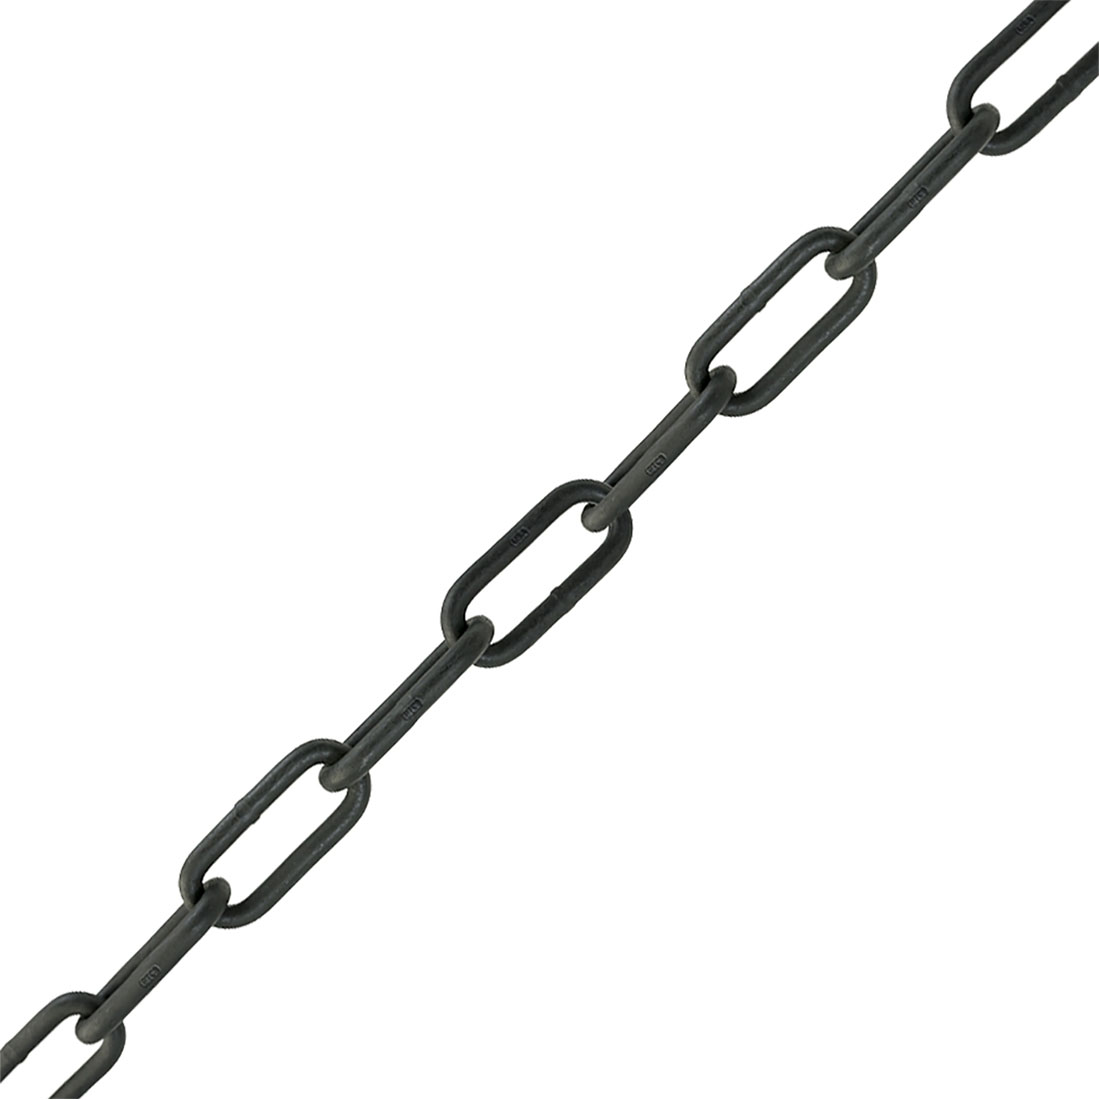 Special Theatrical Alloy (STAC) Chain